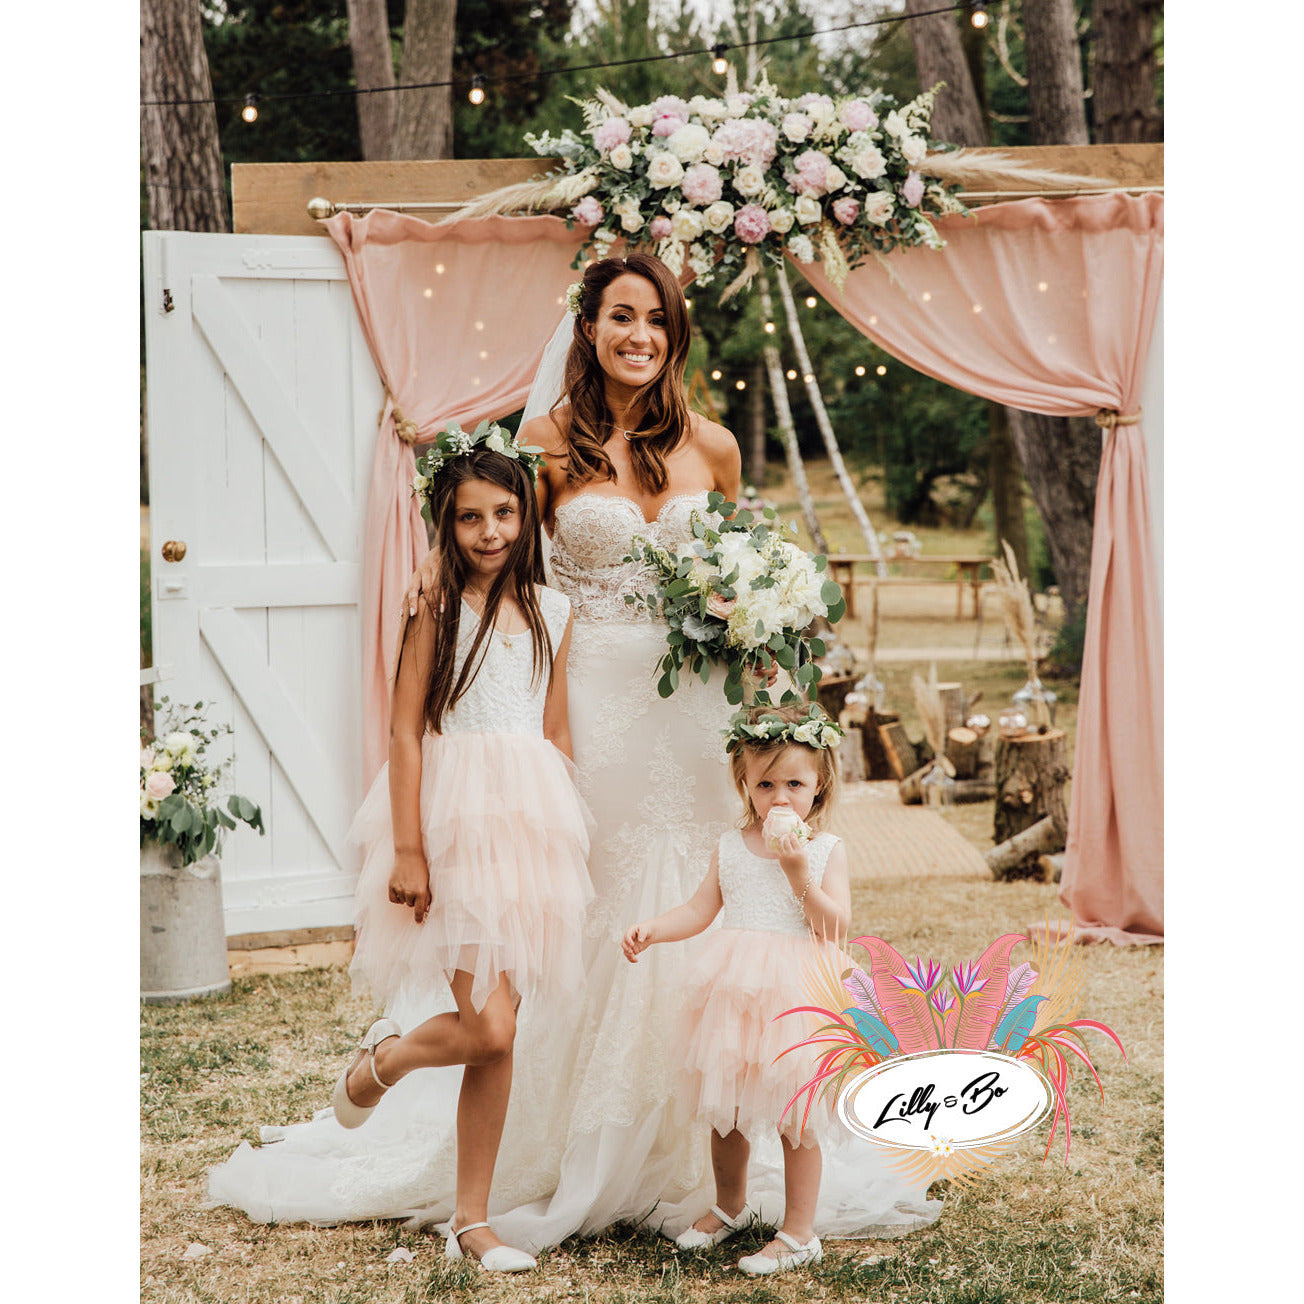 Aria in Blush ~ Party or Flower Girl Dress